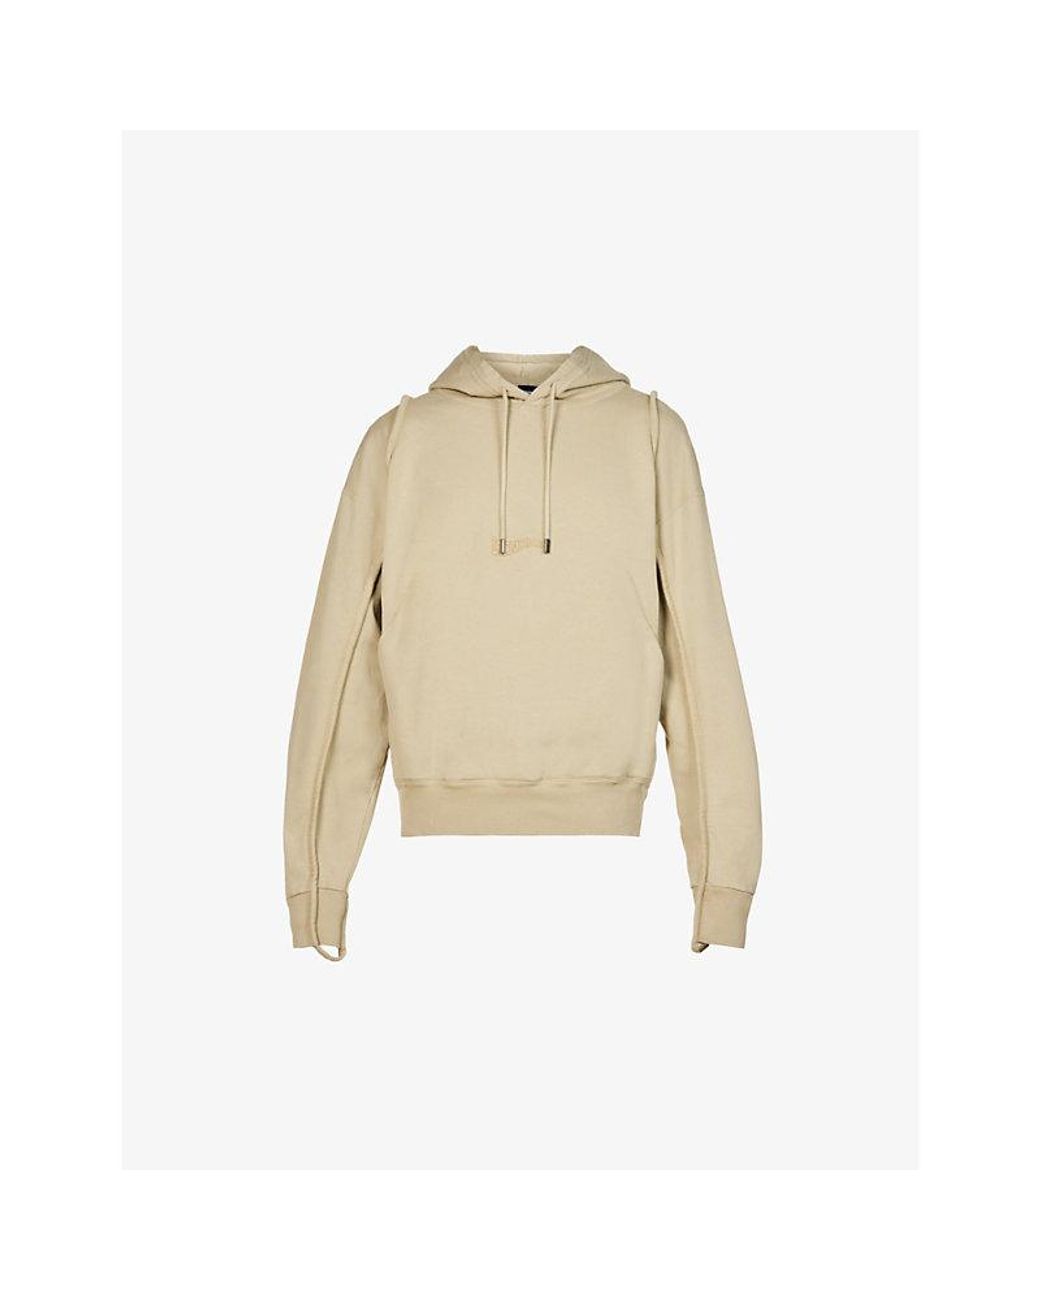 Jacquemus Le Sweatshirt Camargue Brand-embroidered Boxy-fit Cotton